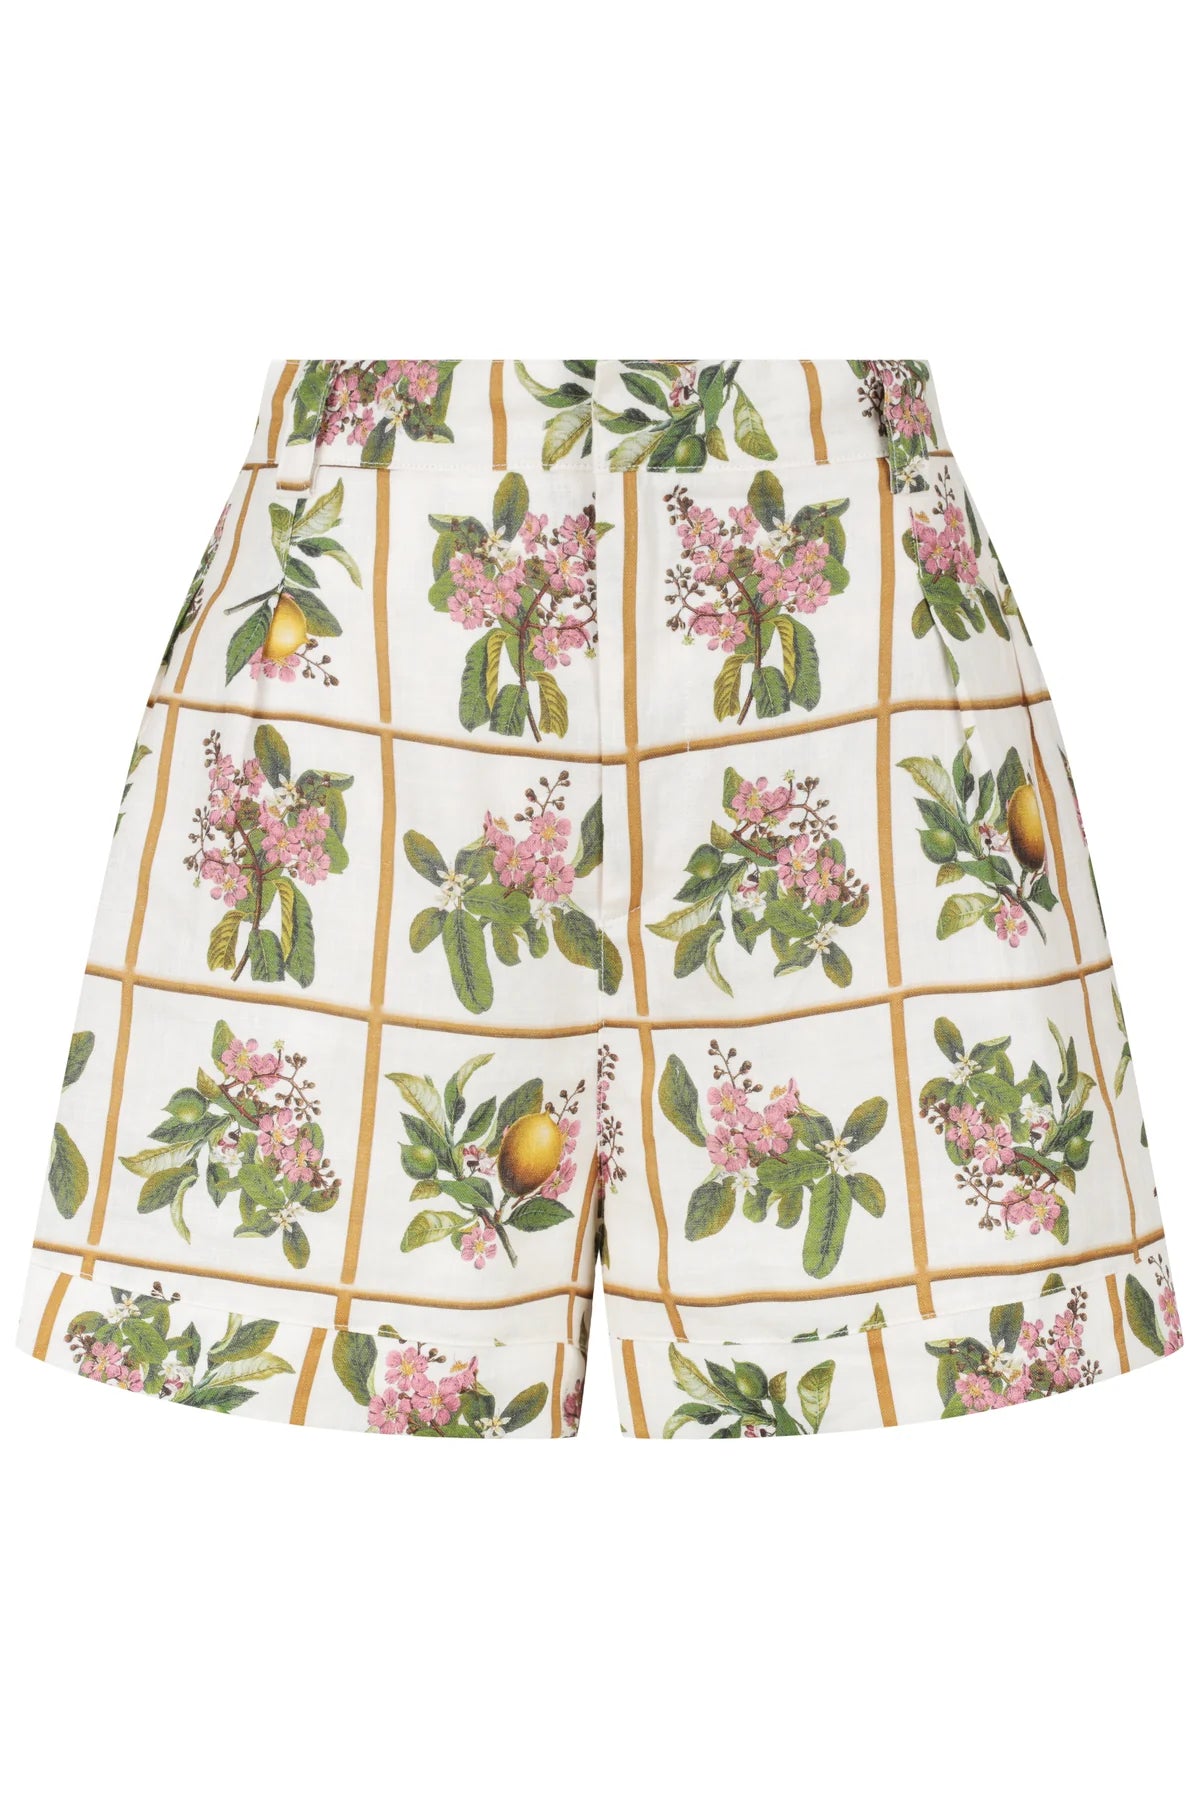 Botanical inspired shorts with belt loops side pockets and zip fly